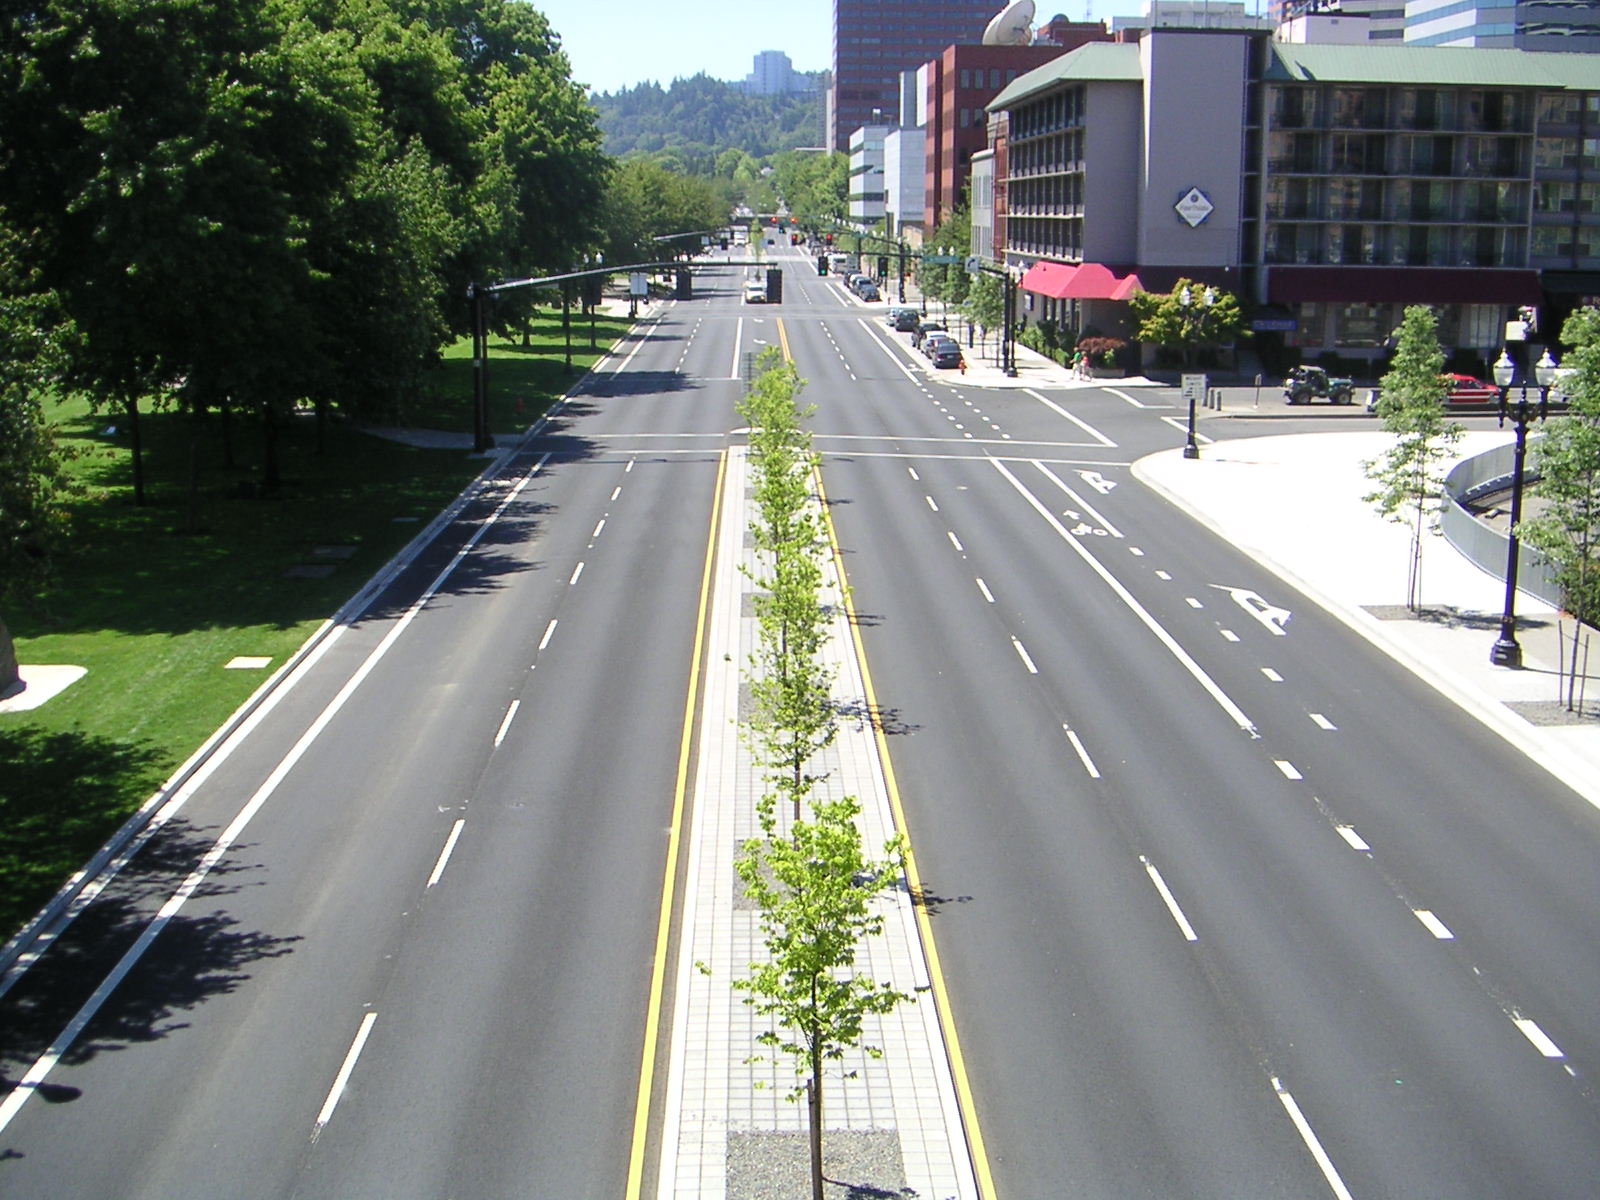 View of street with raised median.